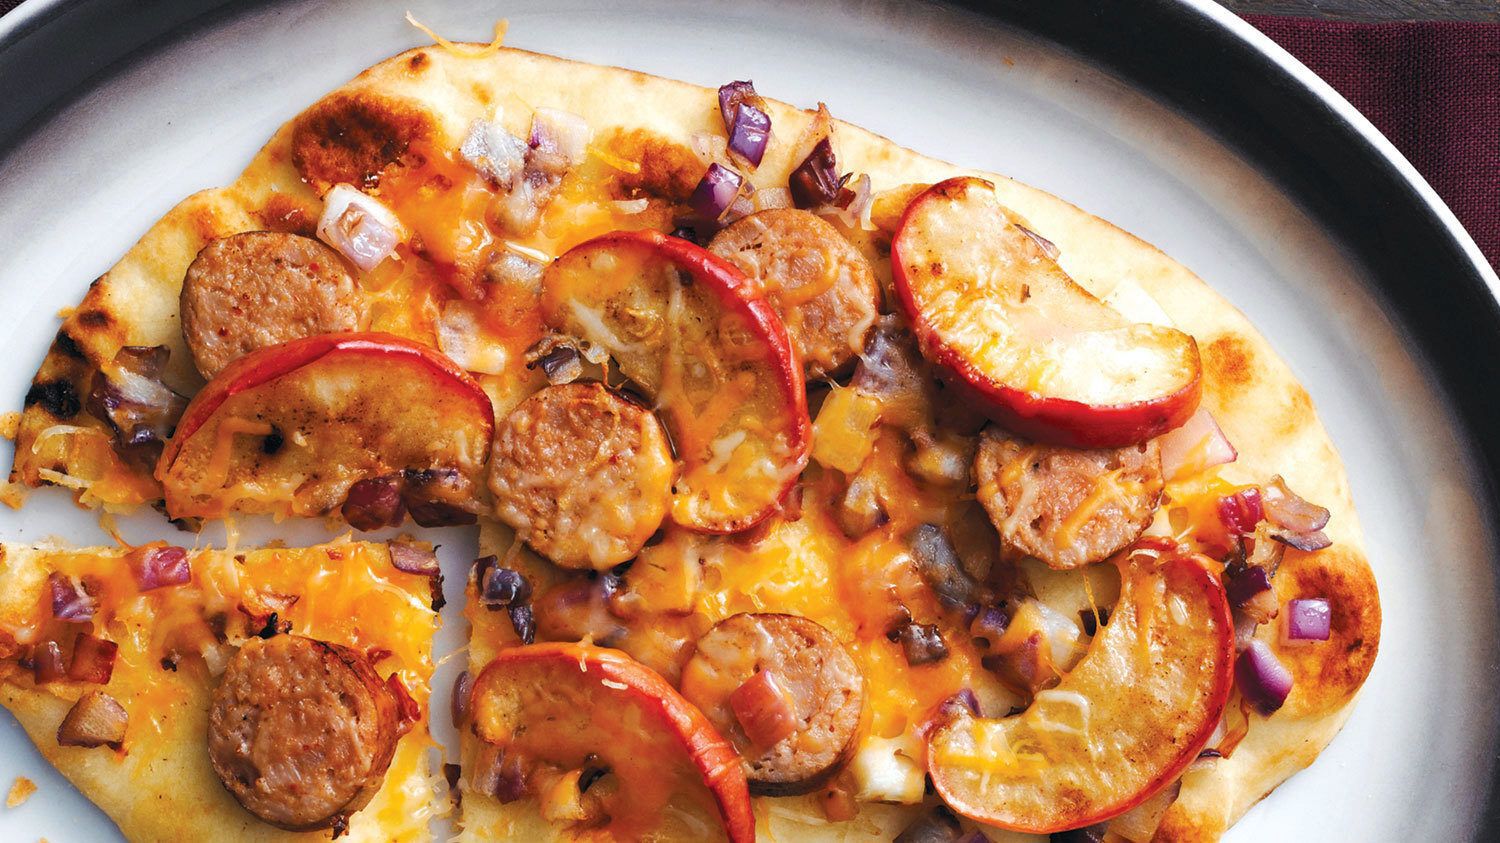 Sausage, Onion & Apple-topped Naan